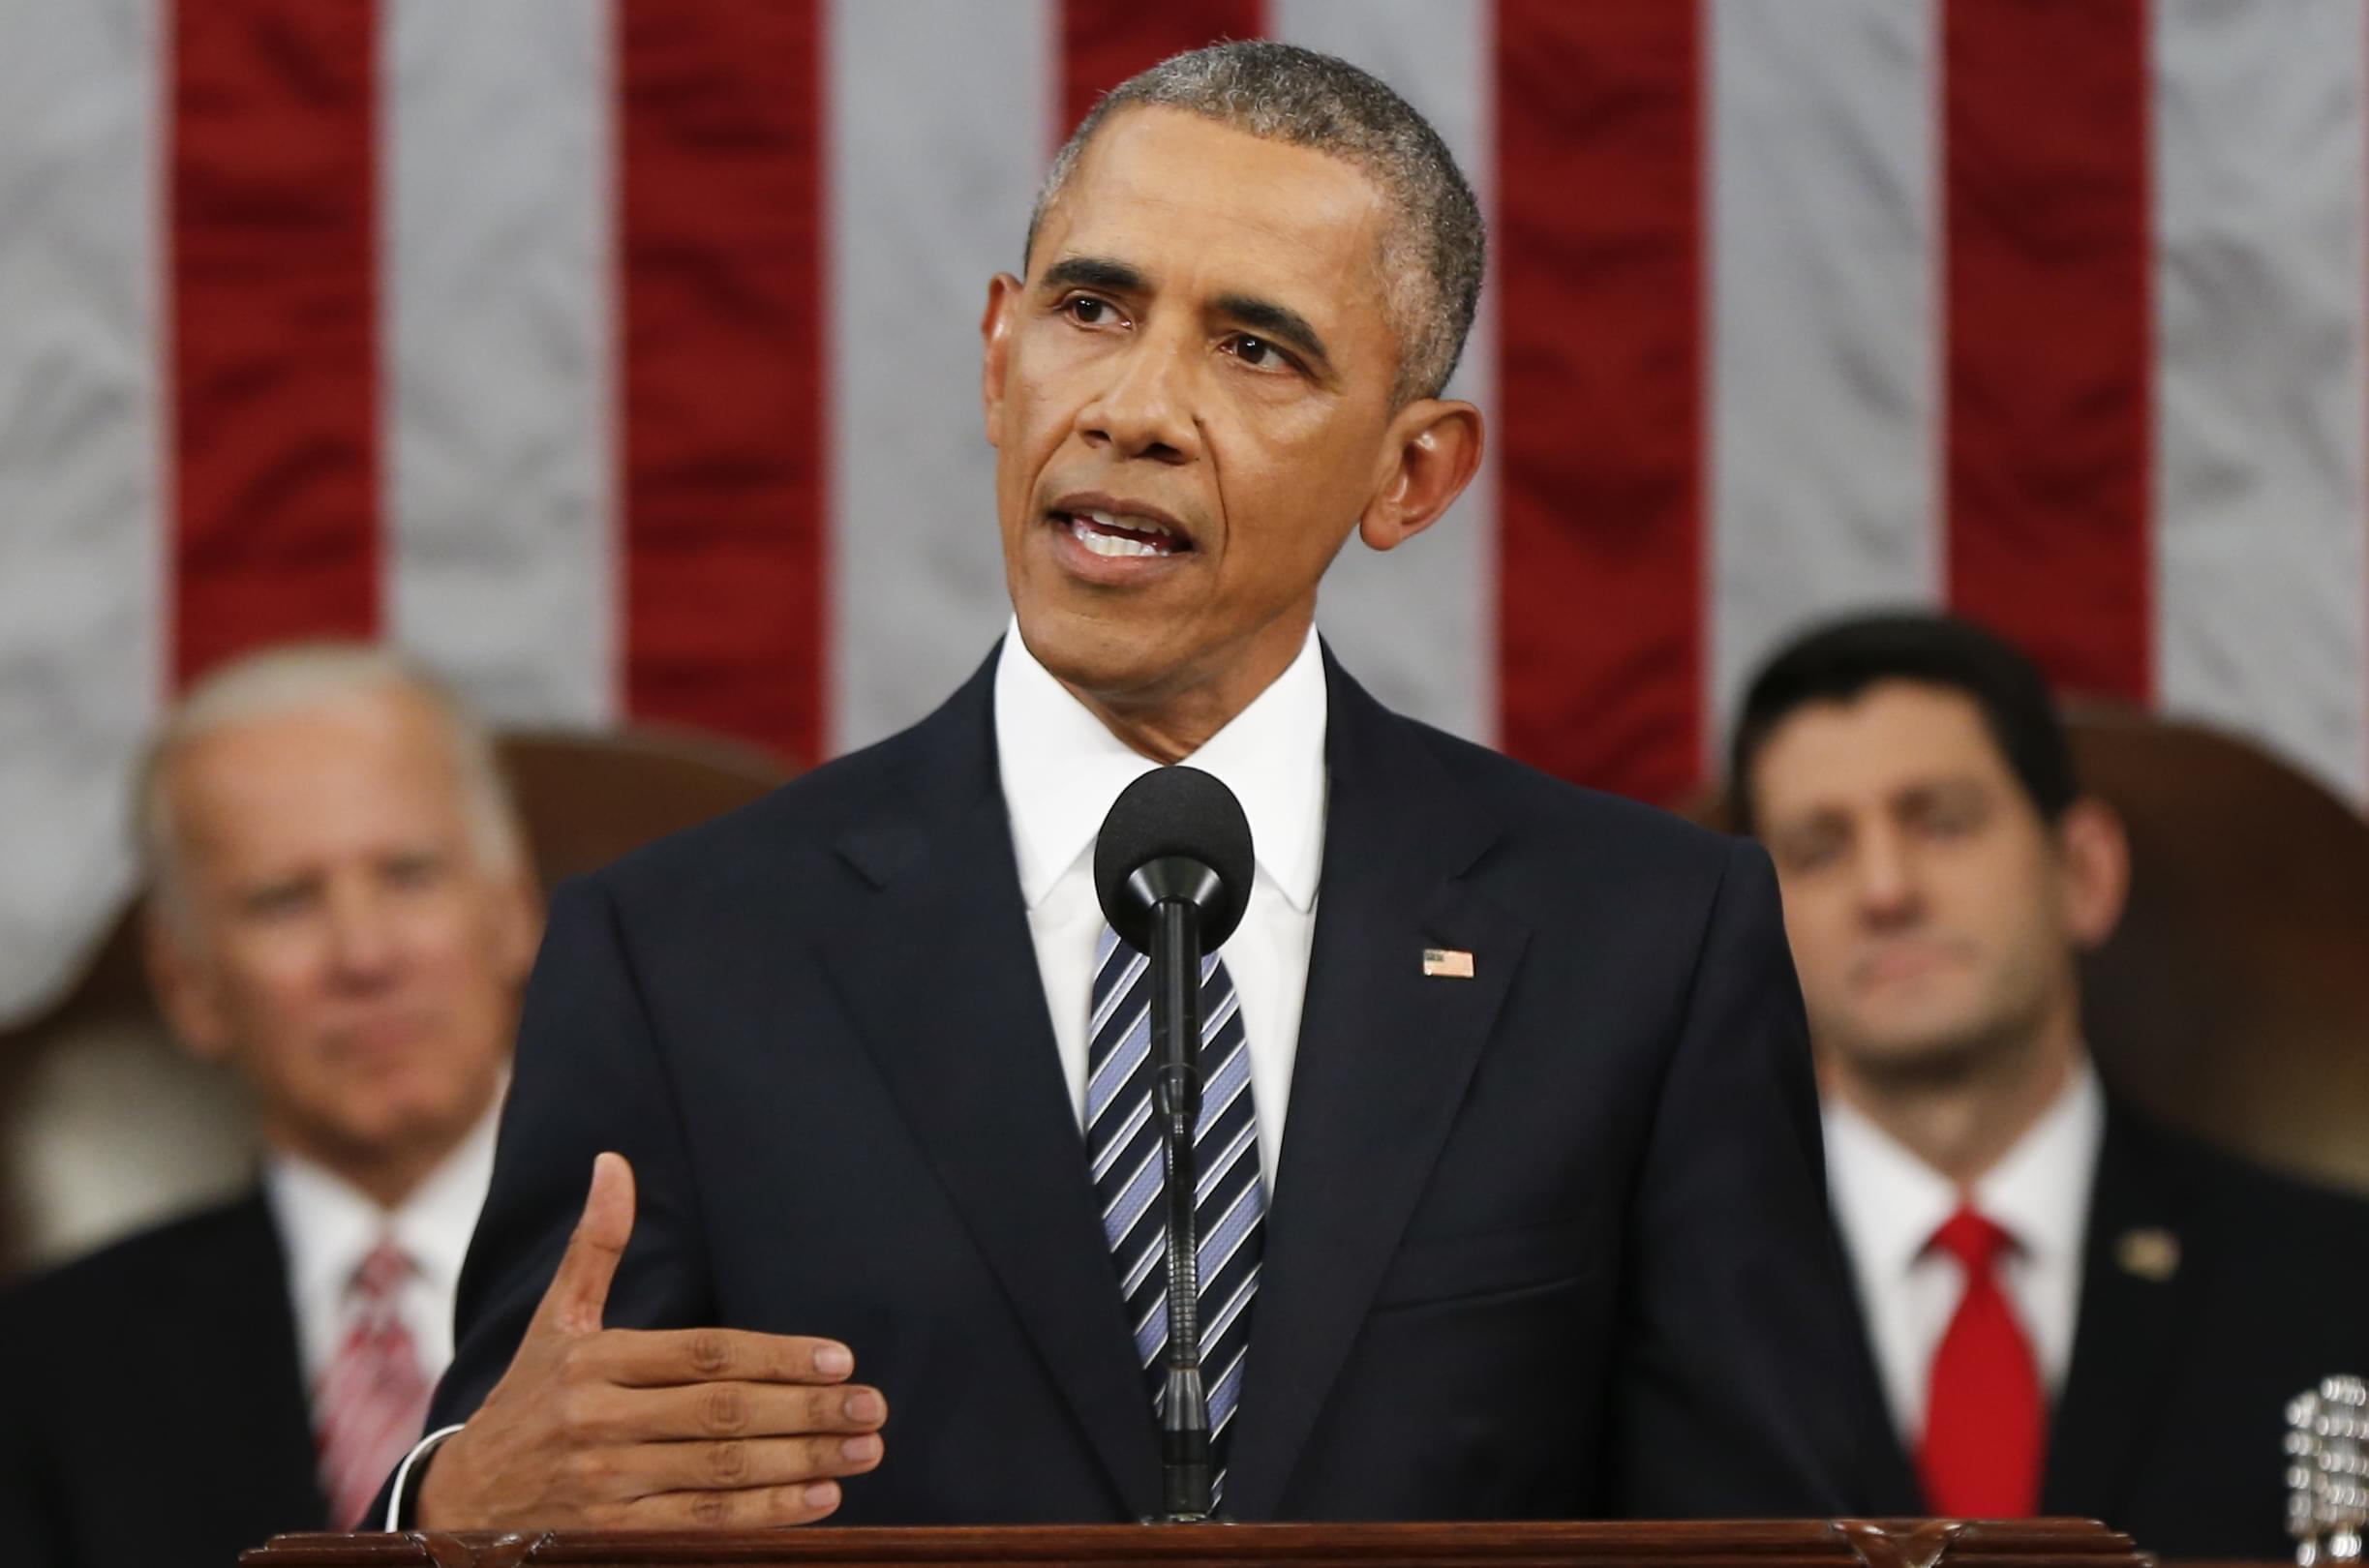 President Barack Obama delivering his State of the Union address on Tuesday, Jan. 12, 2016.